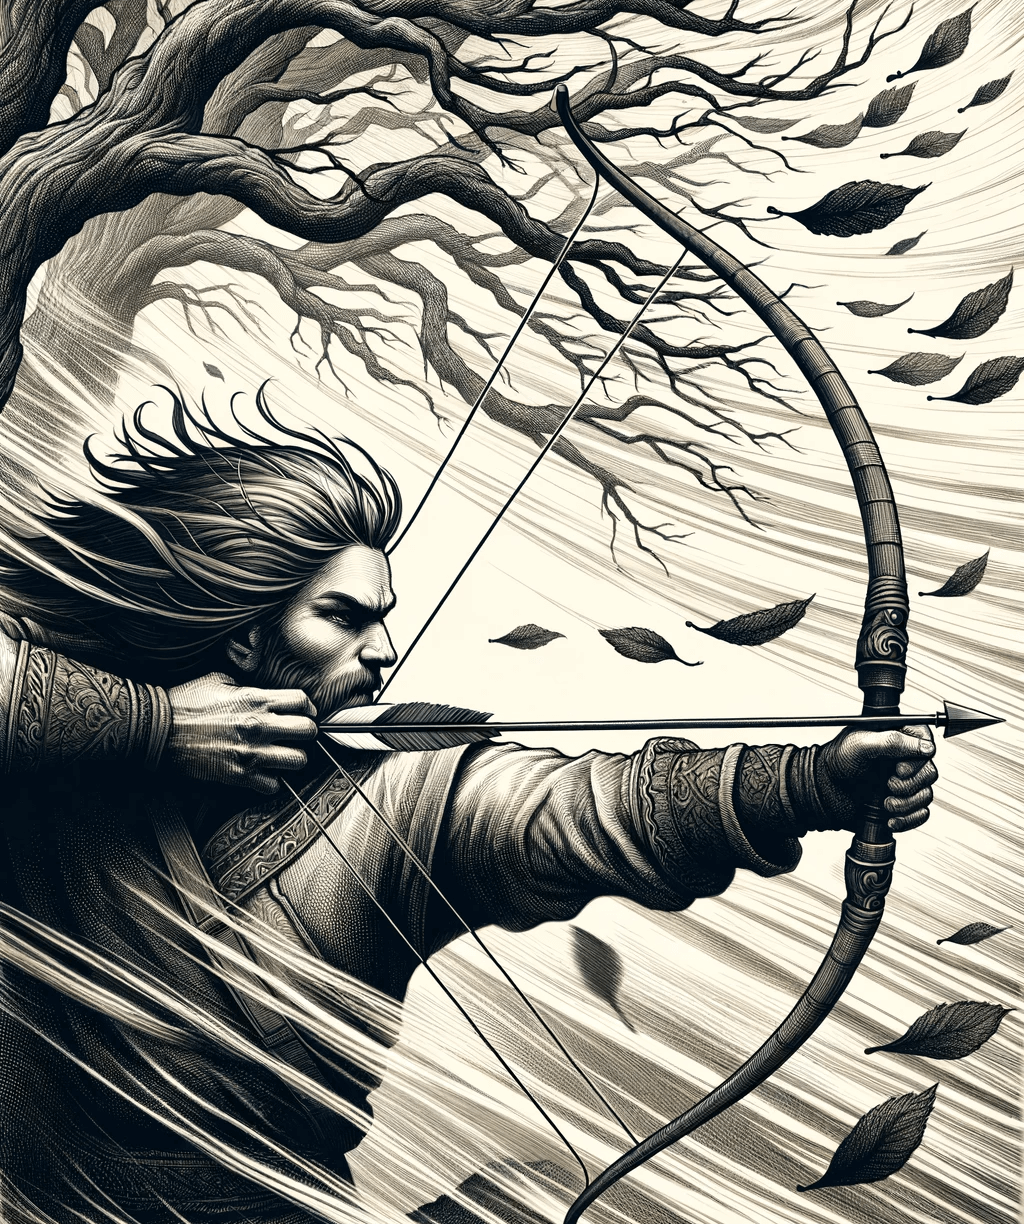 Archer aiming into intense wind